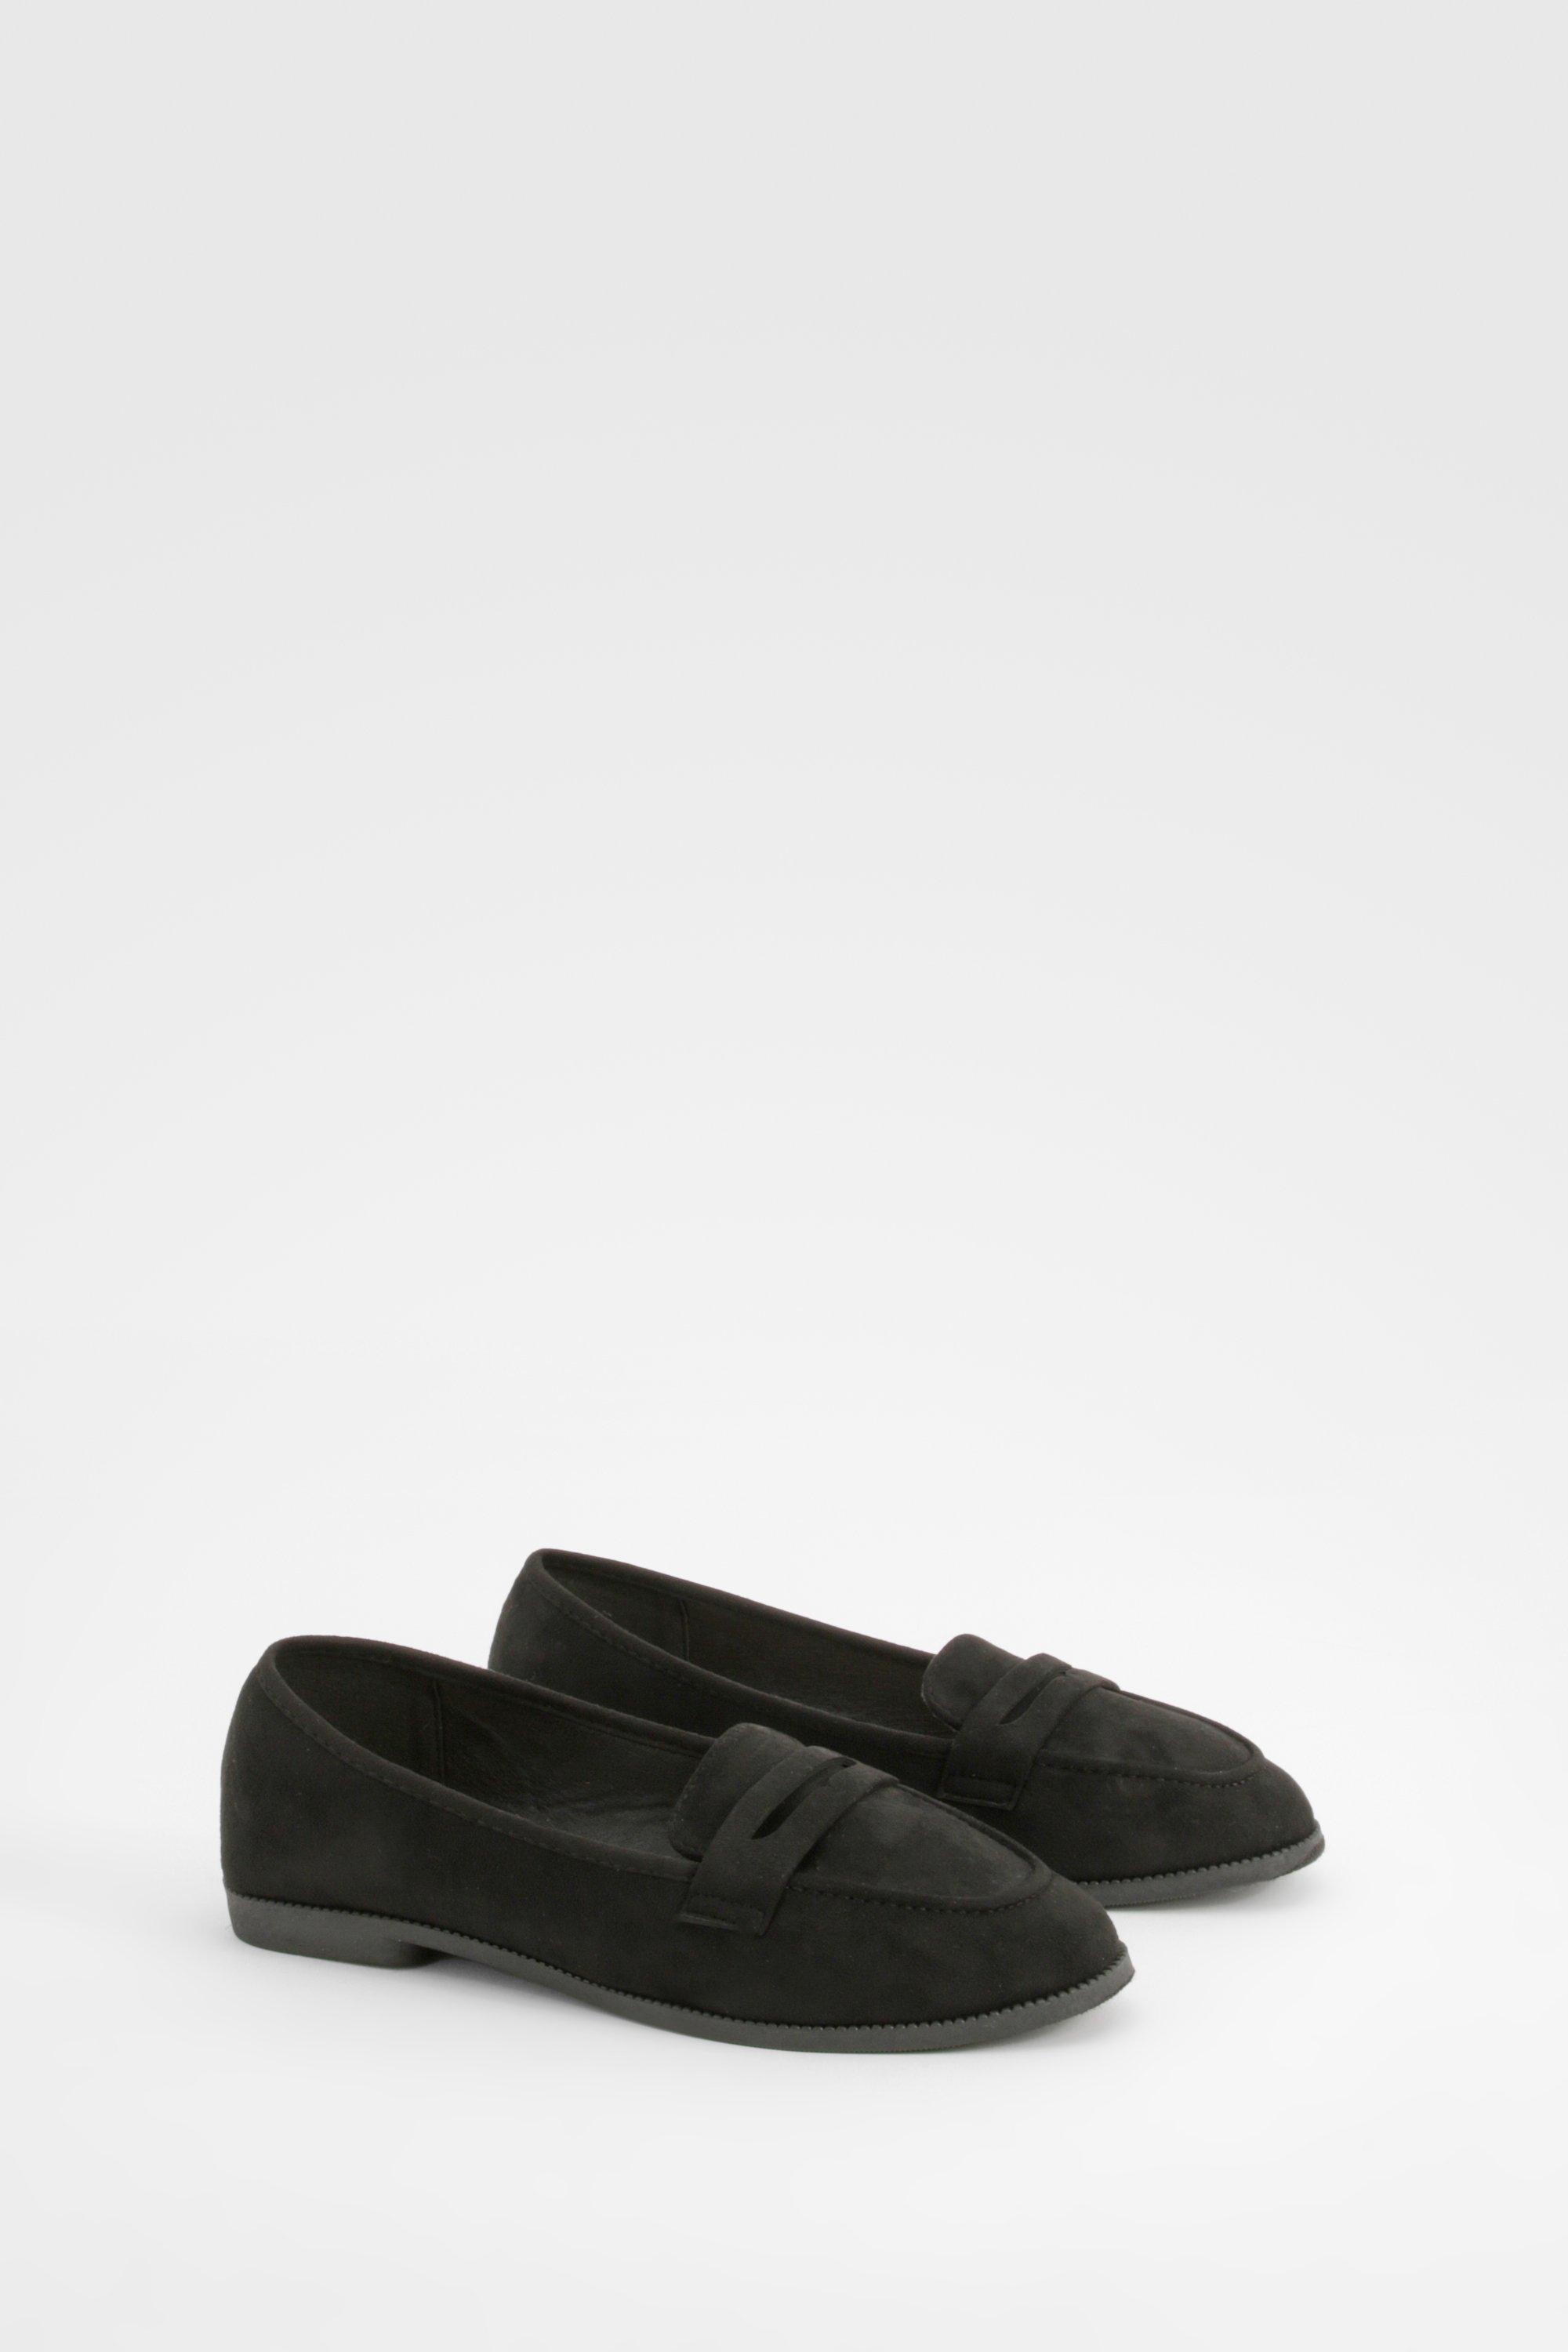 Boohoo Wide Fit Loafers, Black